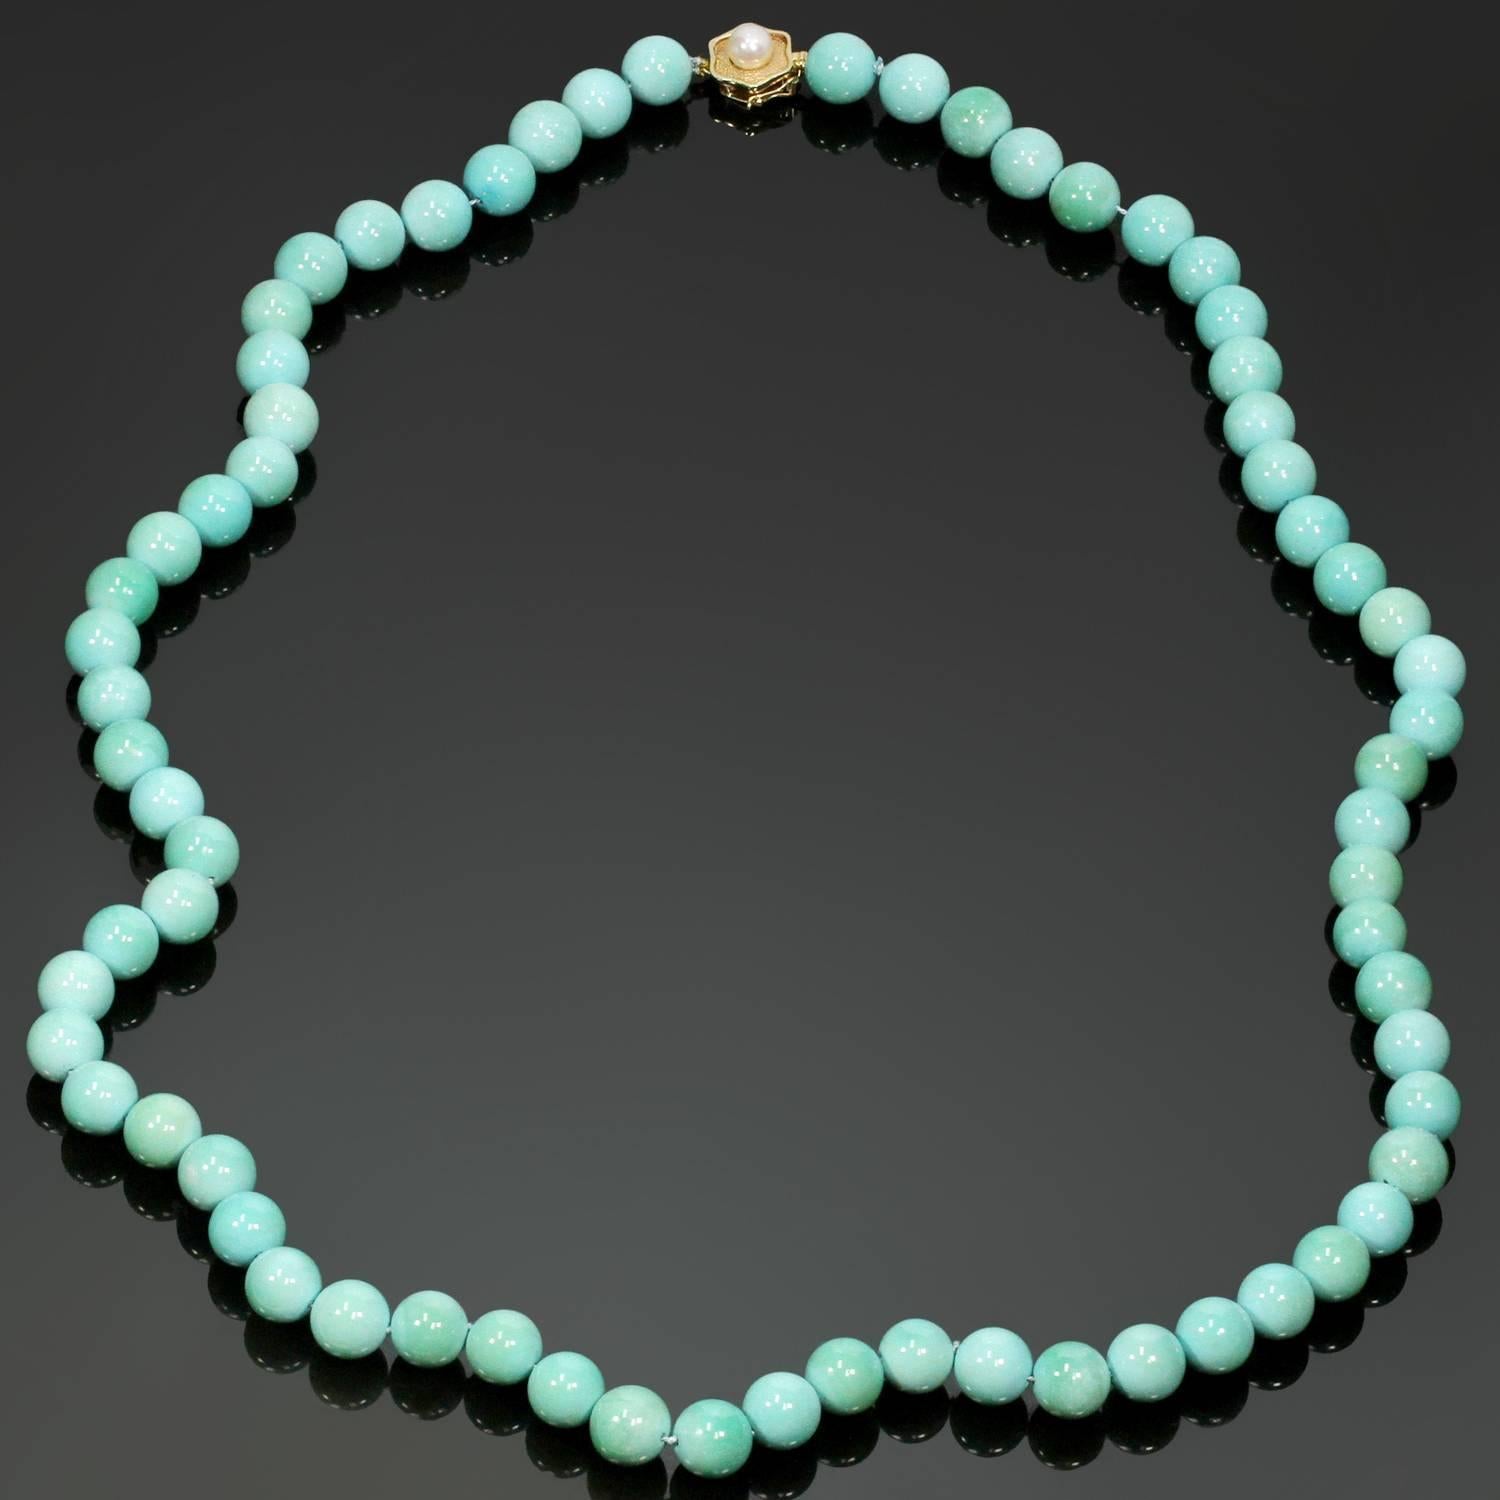 The lovely necklace is composed of 9.80mm - 10.20mm turquoise beads, forming a single strand, completed with a 14k gold clasp and accented with a 6.30mm cultured pearl. The clasp is marked 585 14k. The GIA report # 2185975592, dated January 6, 2018,